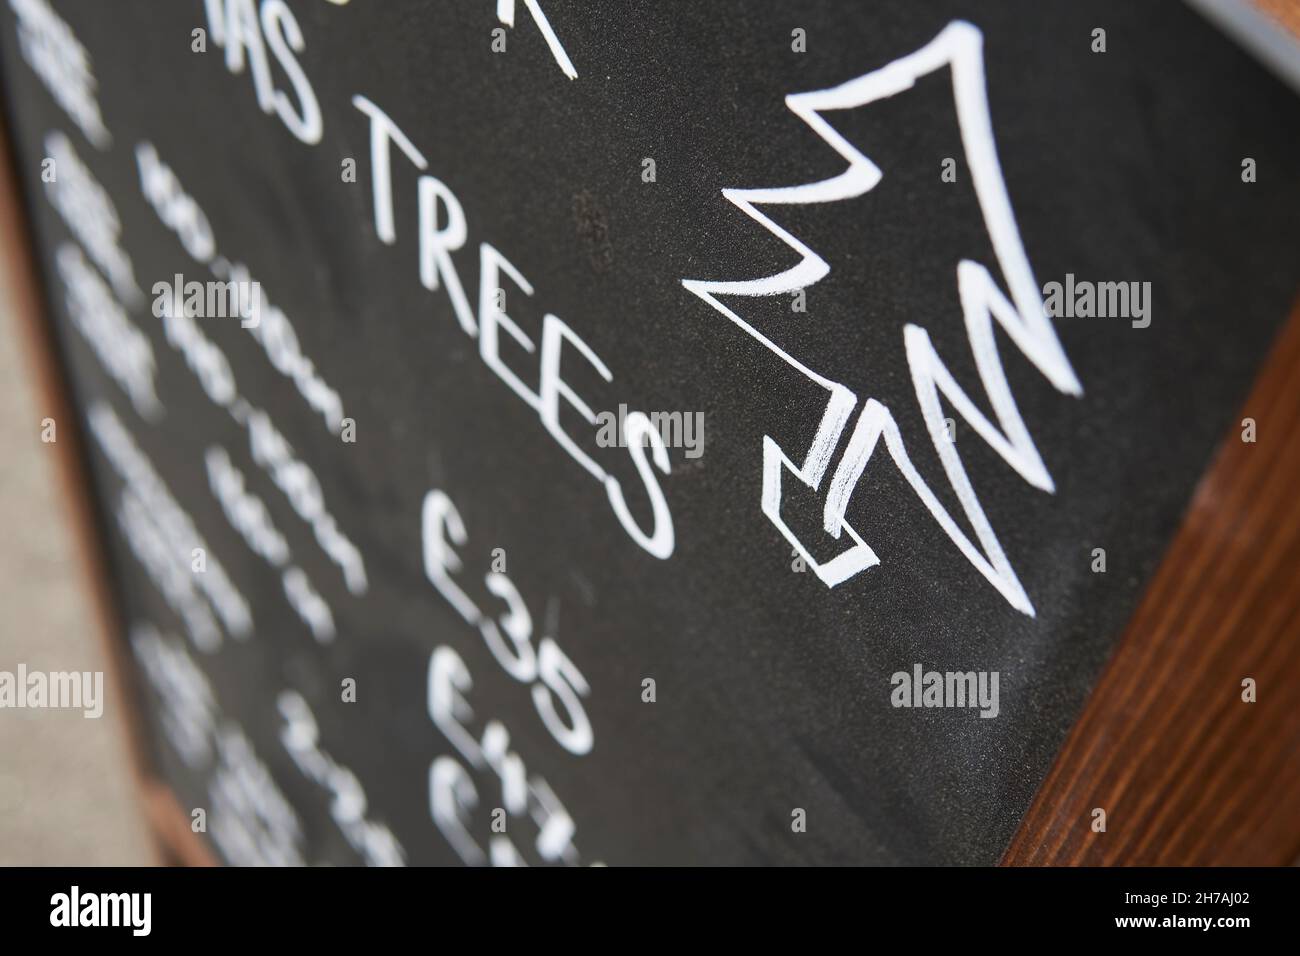 chalk hand-drawn Christmas tree on a background of black board with pound prices. Christmas tree sale. Stock Photo